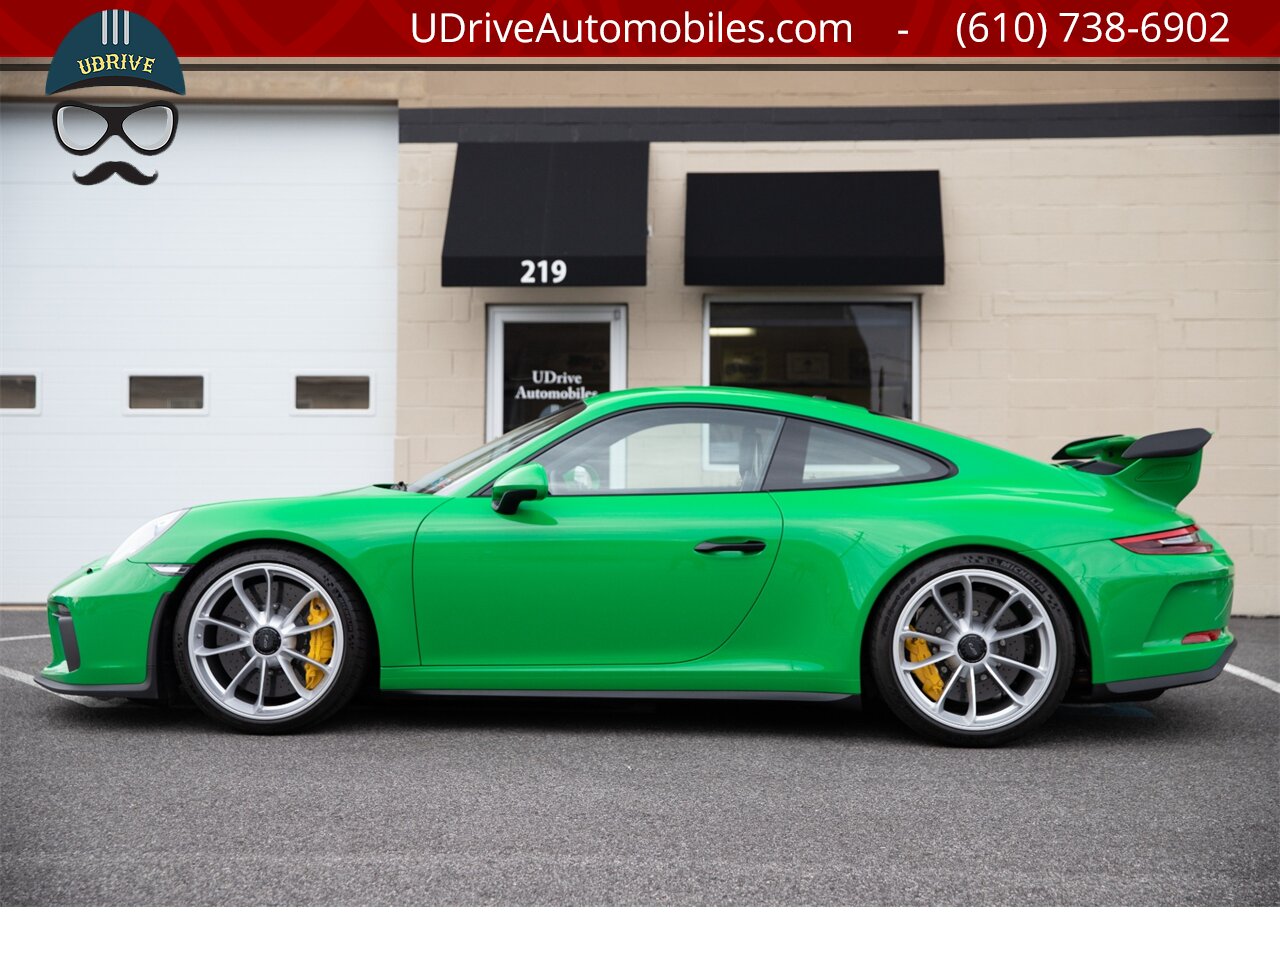 2018 Porsche 911 GT3 6 Speed Paint To Sample Viper Green 48 Miles  Front Axle Lift PCCB Carbon Bucket Seats - Photo 7 - West Chester, PA 19382